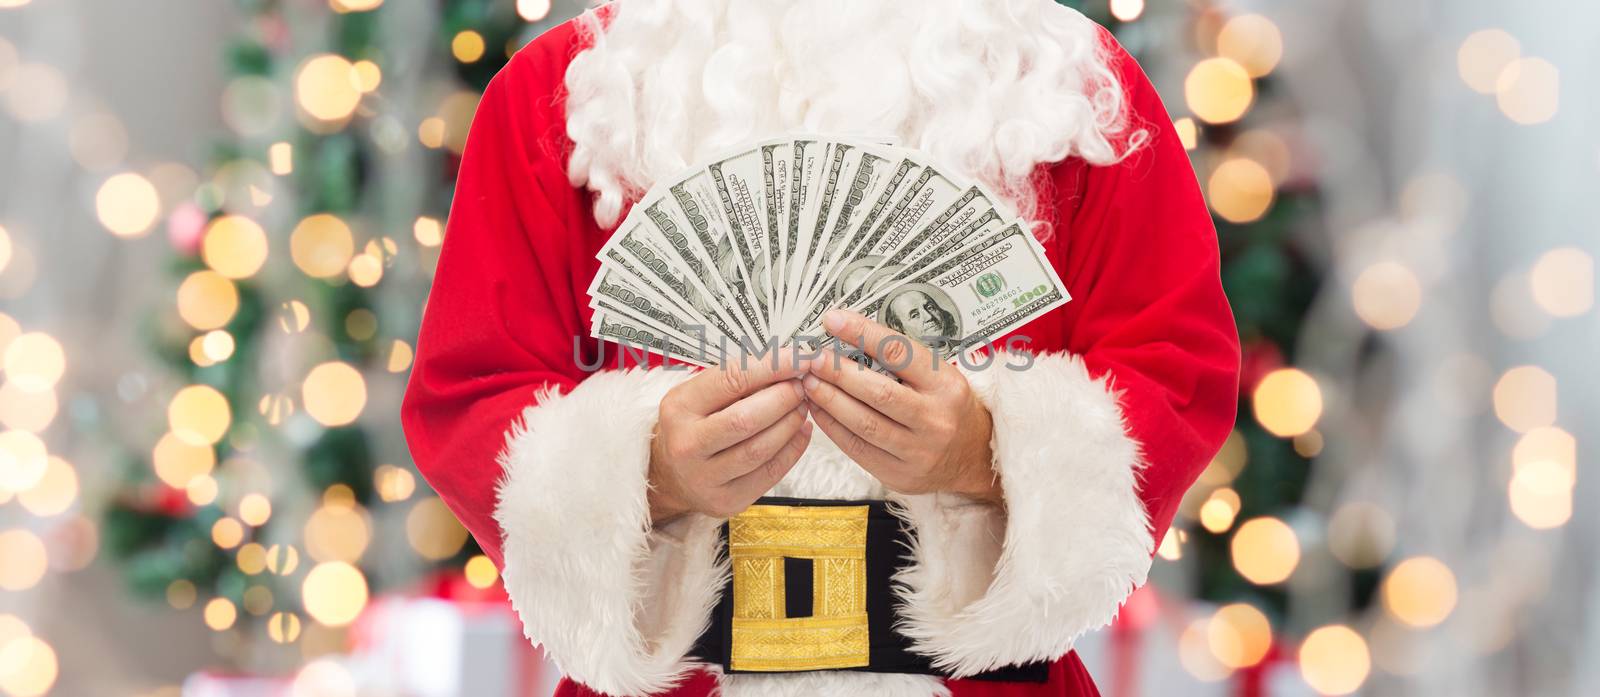 christmas, holidays, winning, currency and people concept - close up of santa claus with dollar money over tree lights background